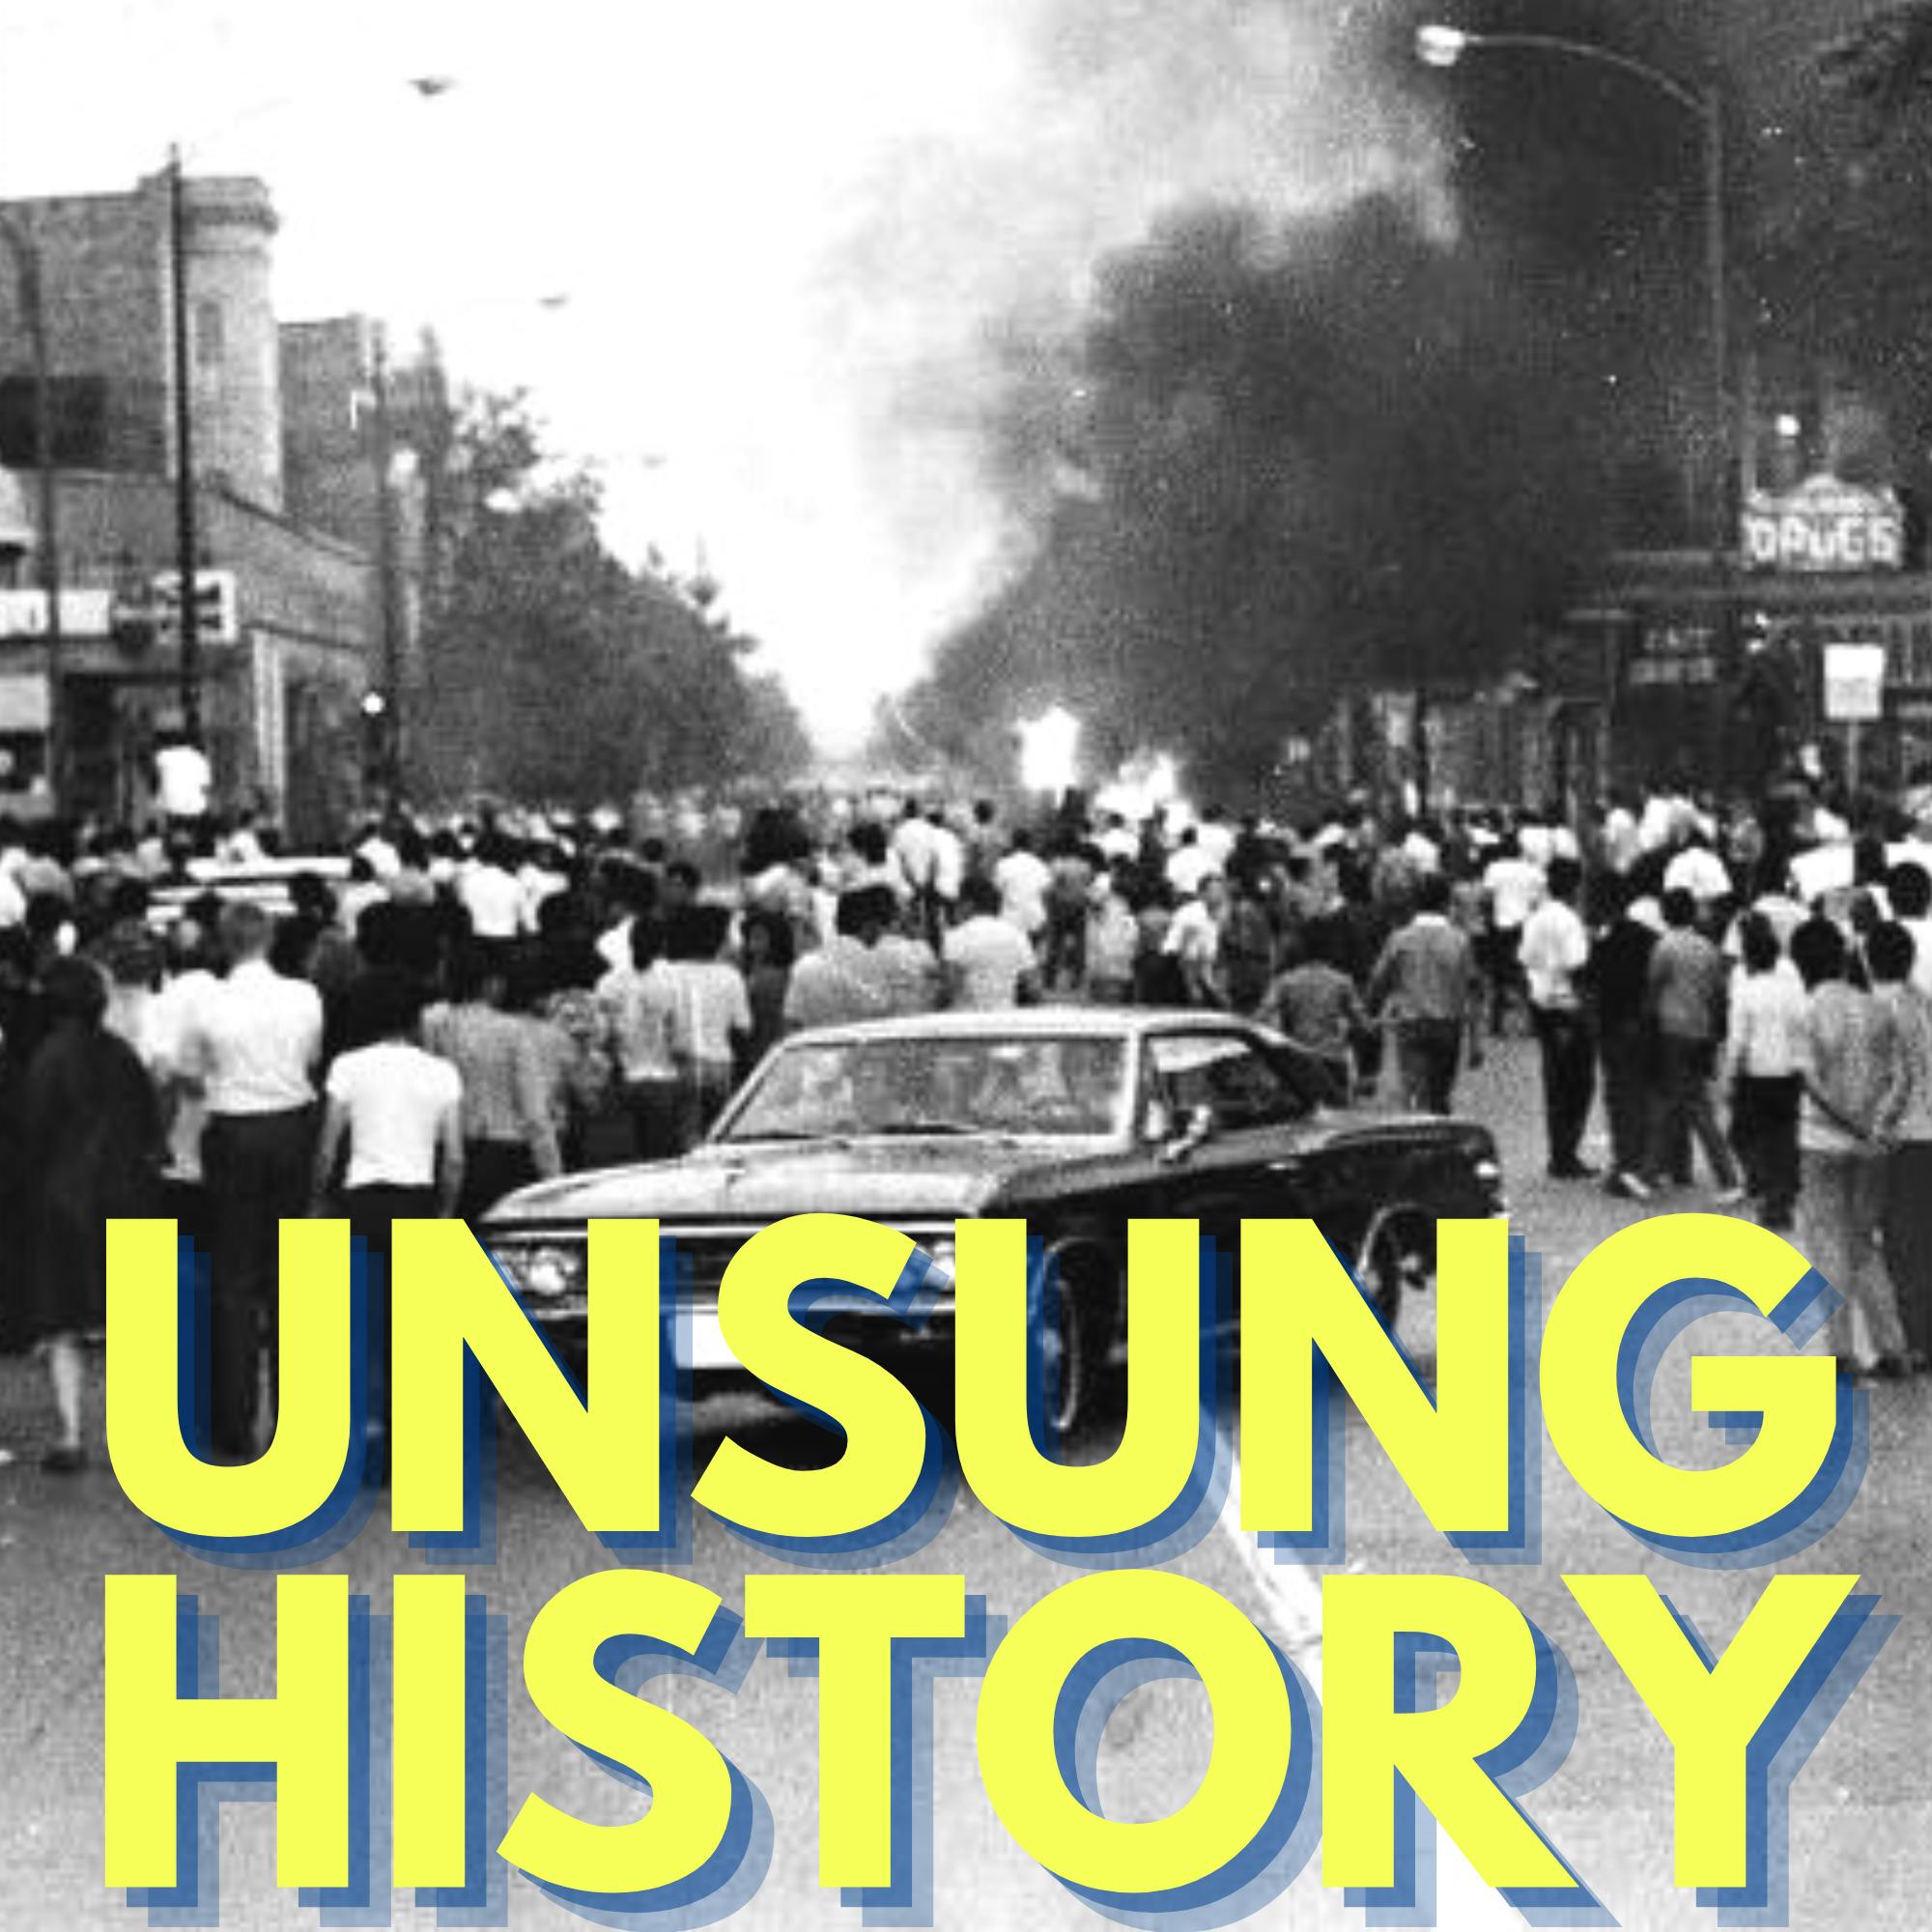 The 1966 Division Street Uprising & the Puerto Rican community in Chicago